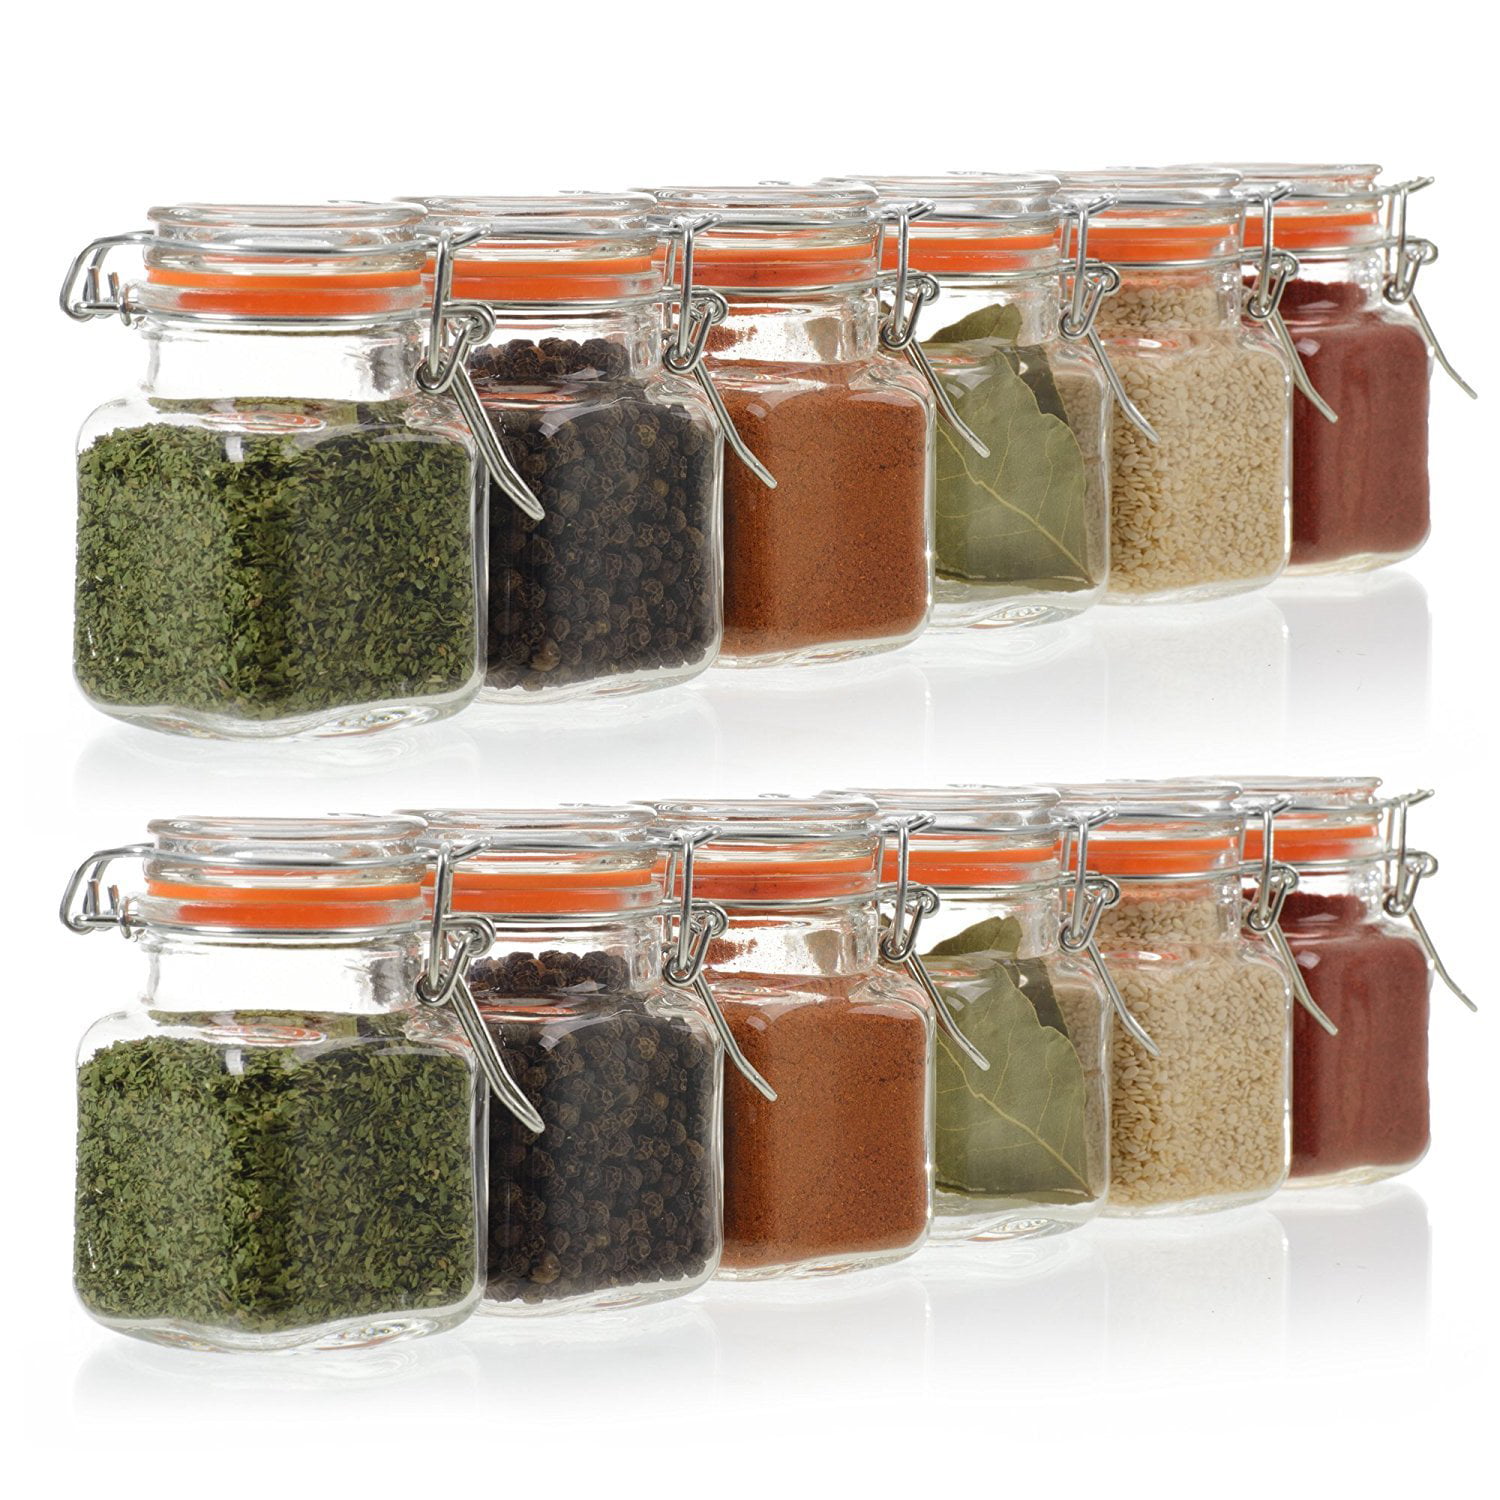 spice jars with labels on top